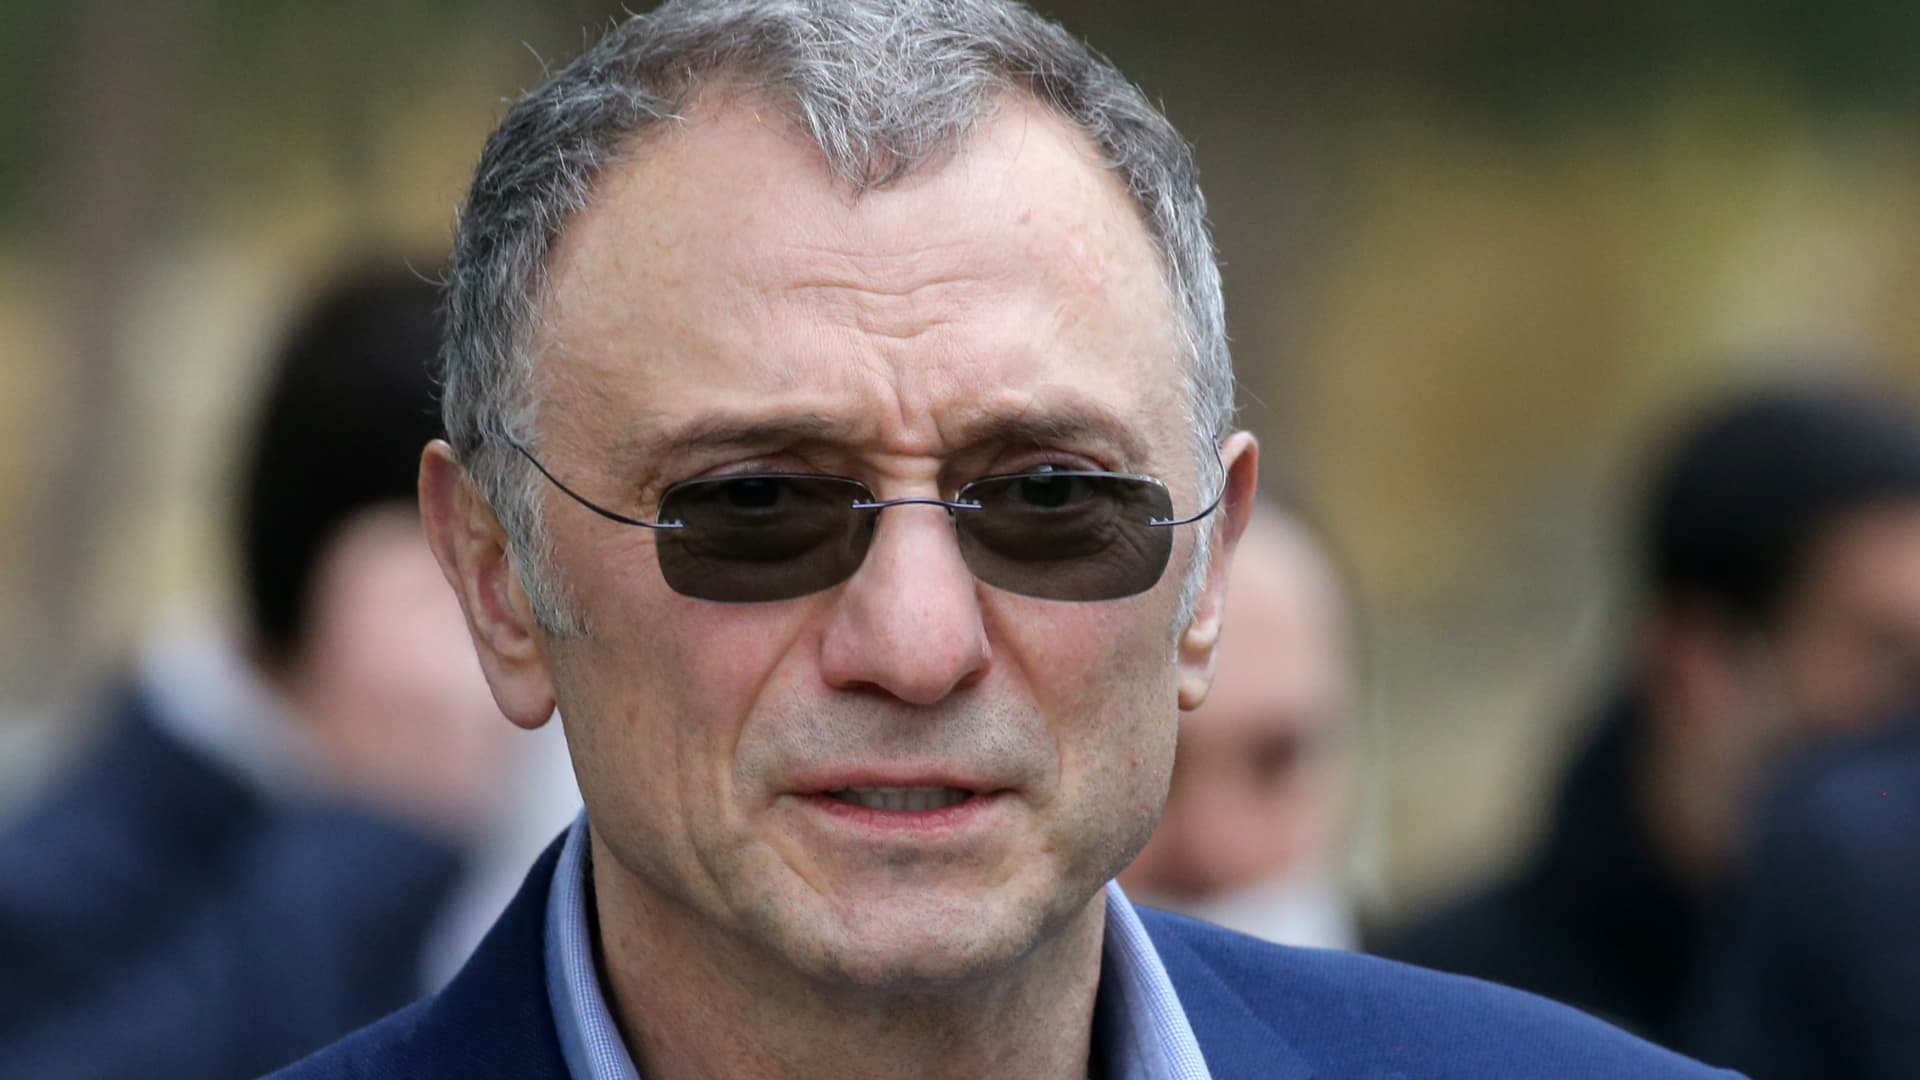 Russian billionaire, businessman and Council of the Federation Member Suleyman Kerimov attends a meeting at the Naryn Kala Castle, on April 14, 2021 in Derbent, Dagestan, Russia.